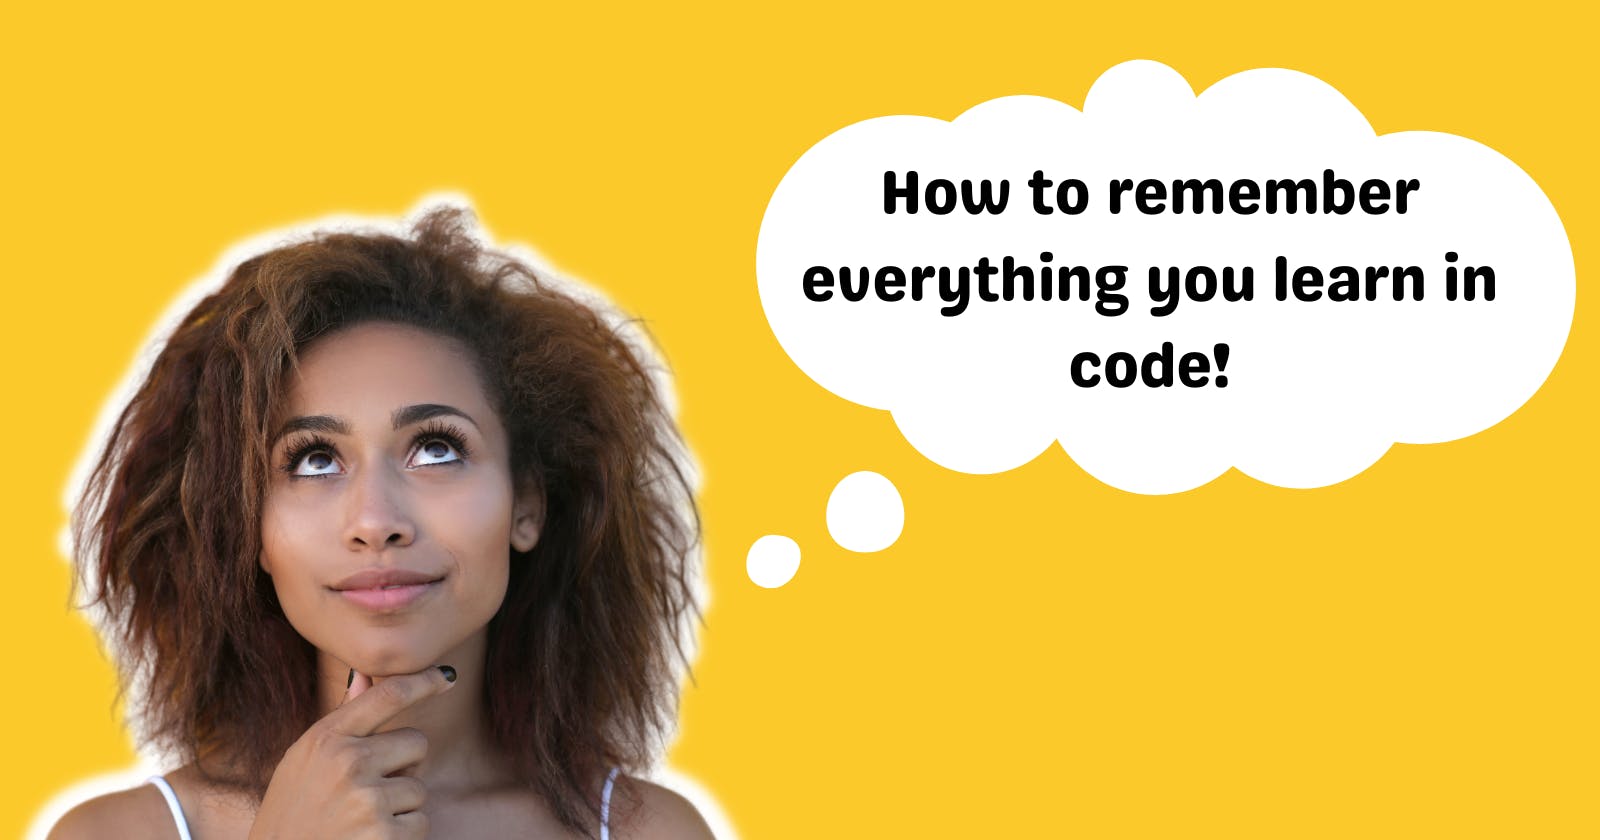 How to Remember everything you learn in code